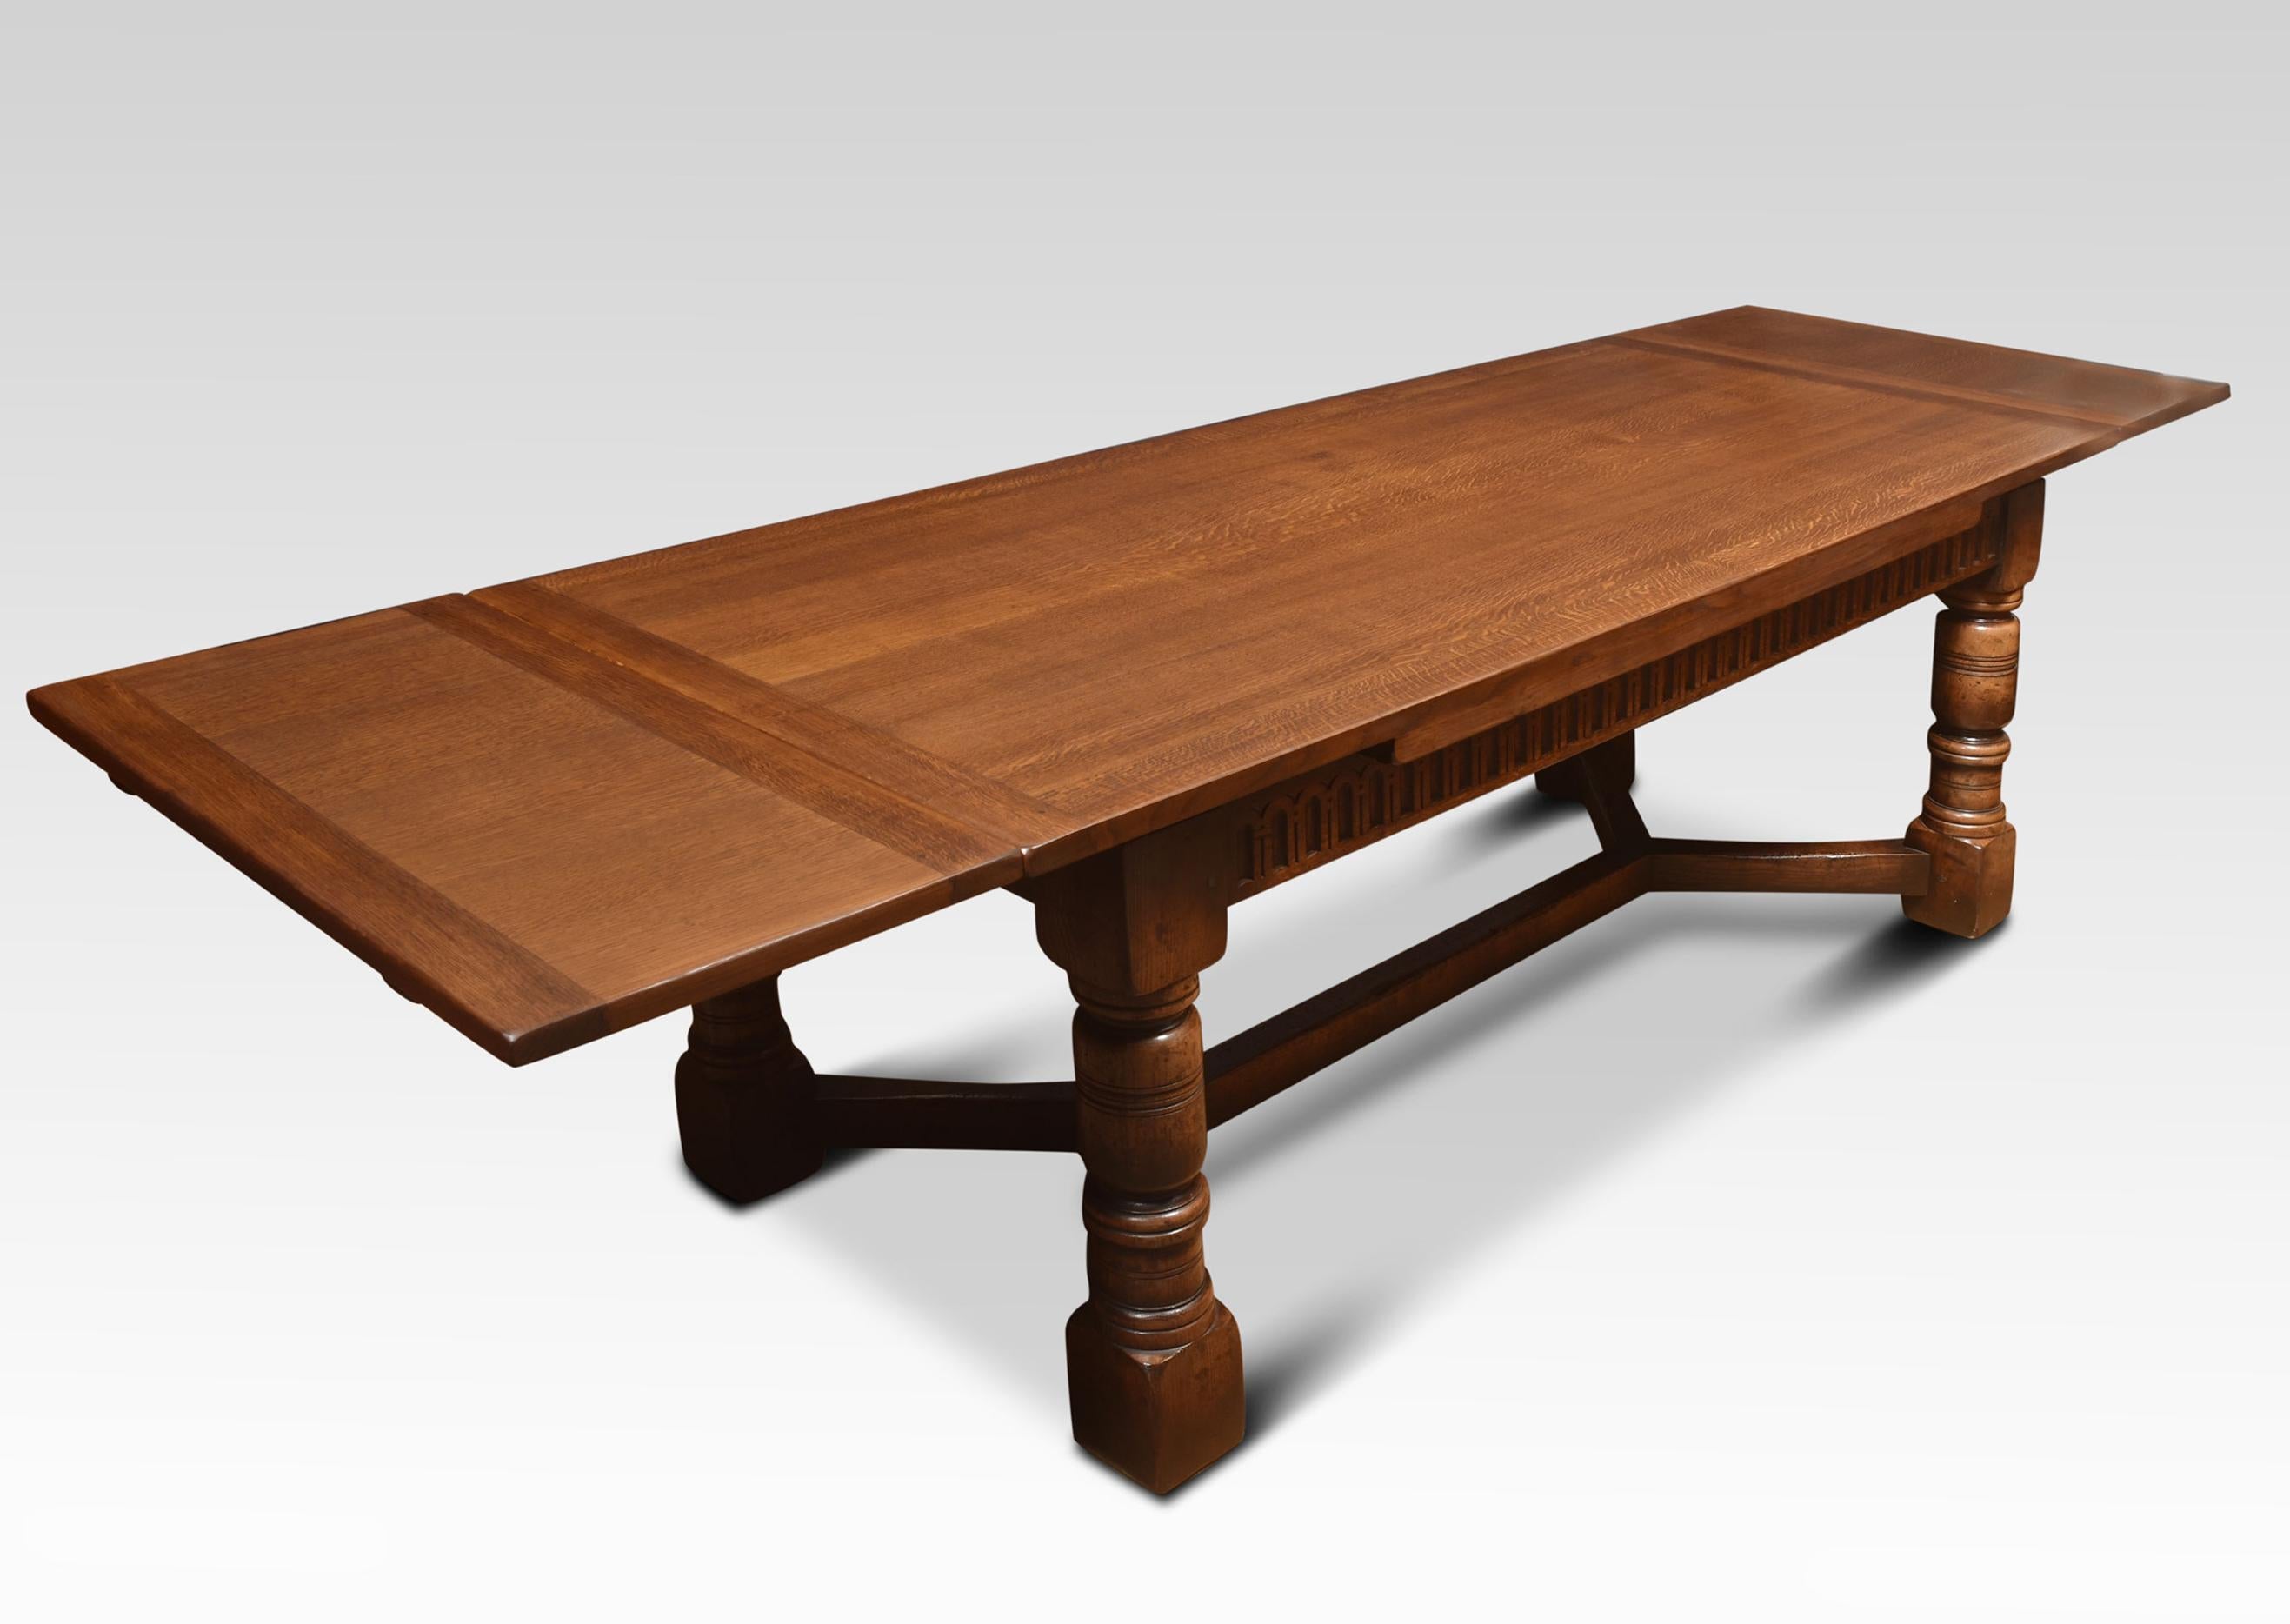 Oak draw leaf refectory table, the rectangular solid oak top above two pull-out ends, to the ed frieze above turned gun barrel legs joined by a double Y-shaped stretcher.
Dimensions
Height 30.5 Inches
Width 84 Inches when open 120 Inches
Depth